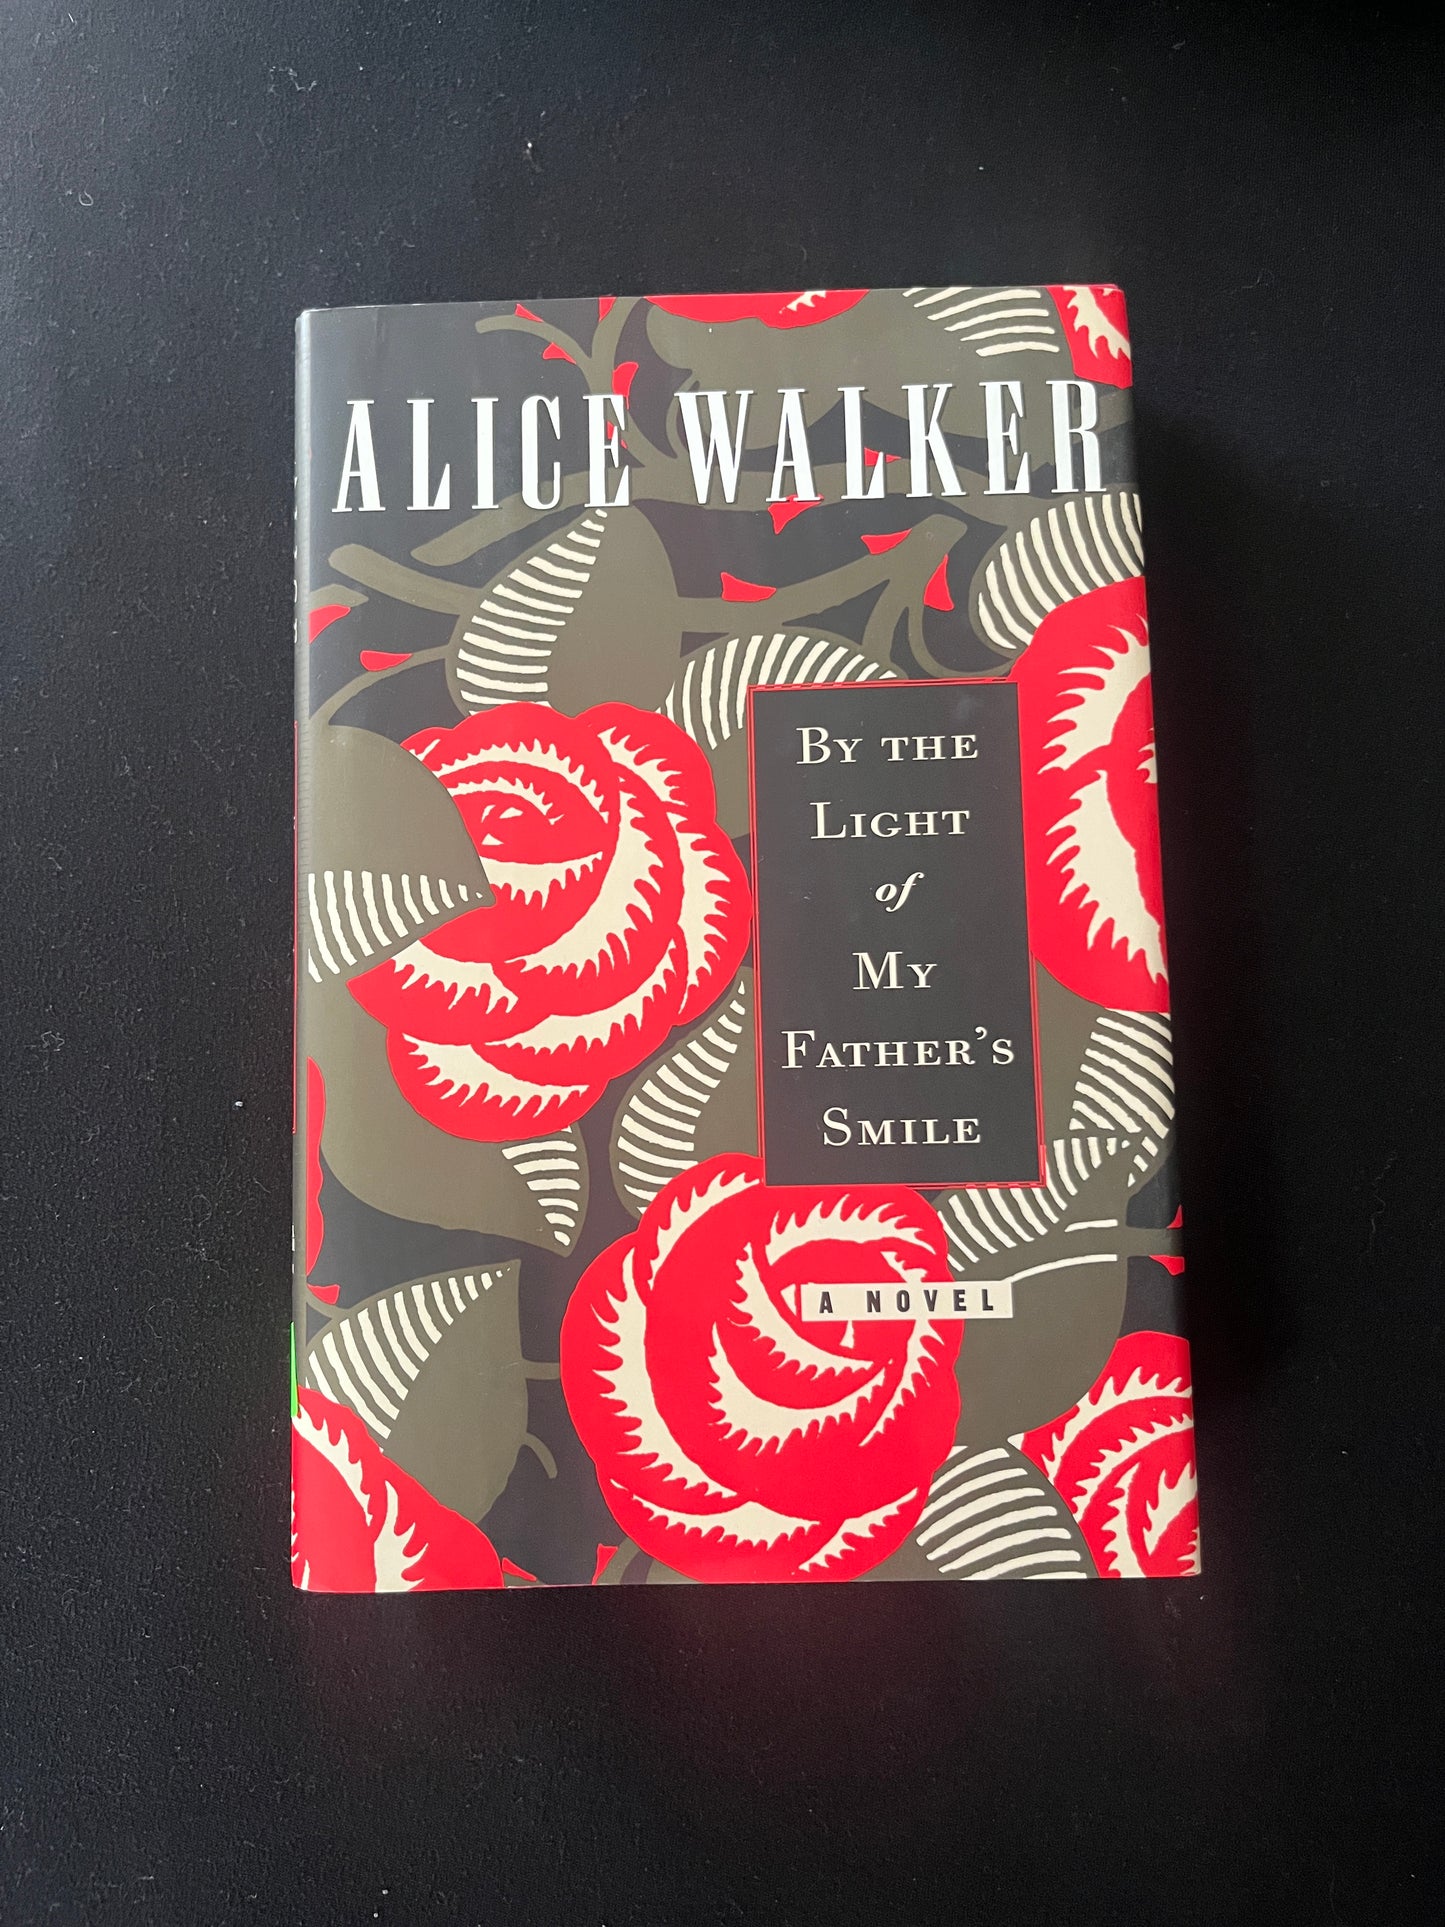 BY THE LIGHT OF MY FATHER'S SMILE by Alice Walker